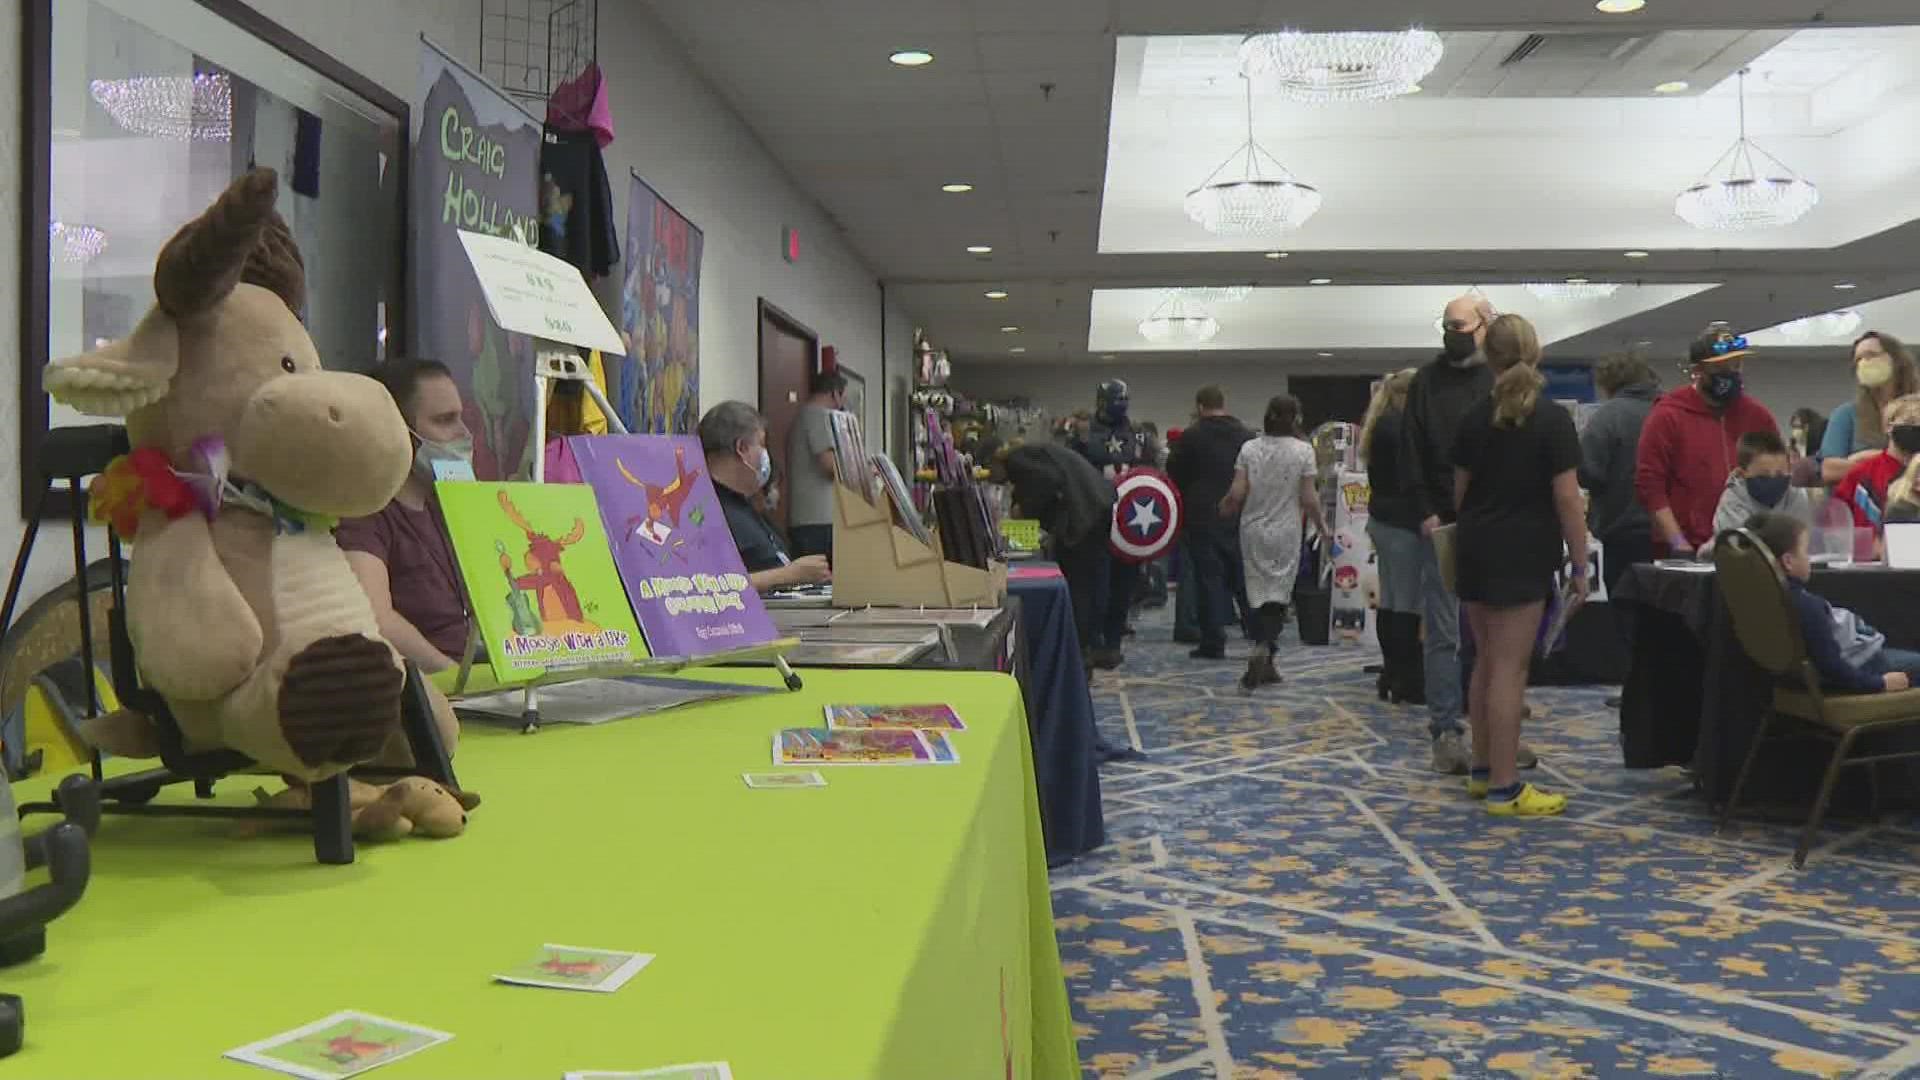 The 'Comic Con' for kids inspires creativity and learning through family friendly comics, workshops, games, and more.